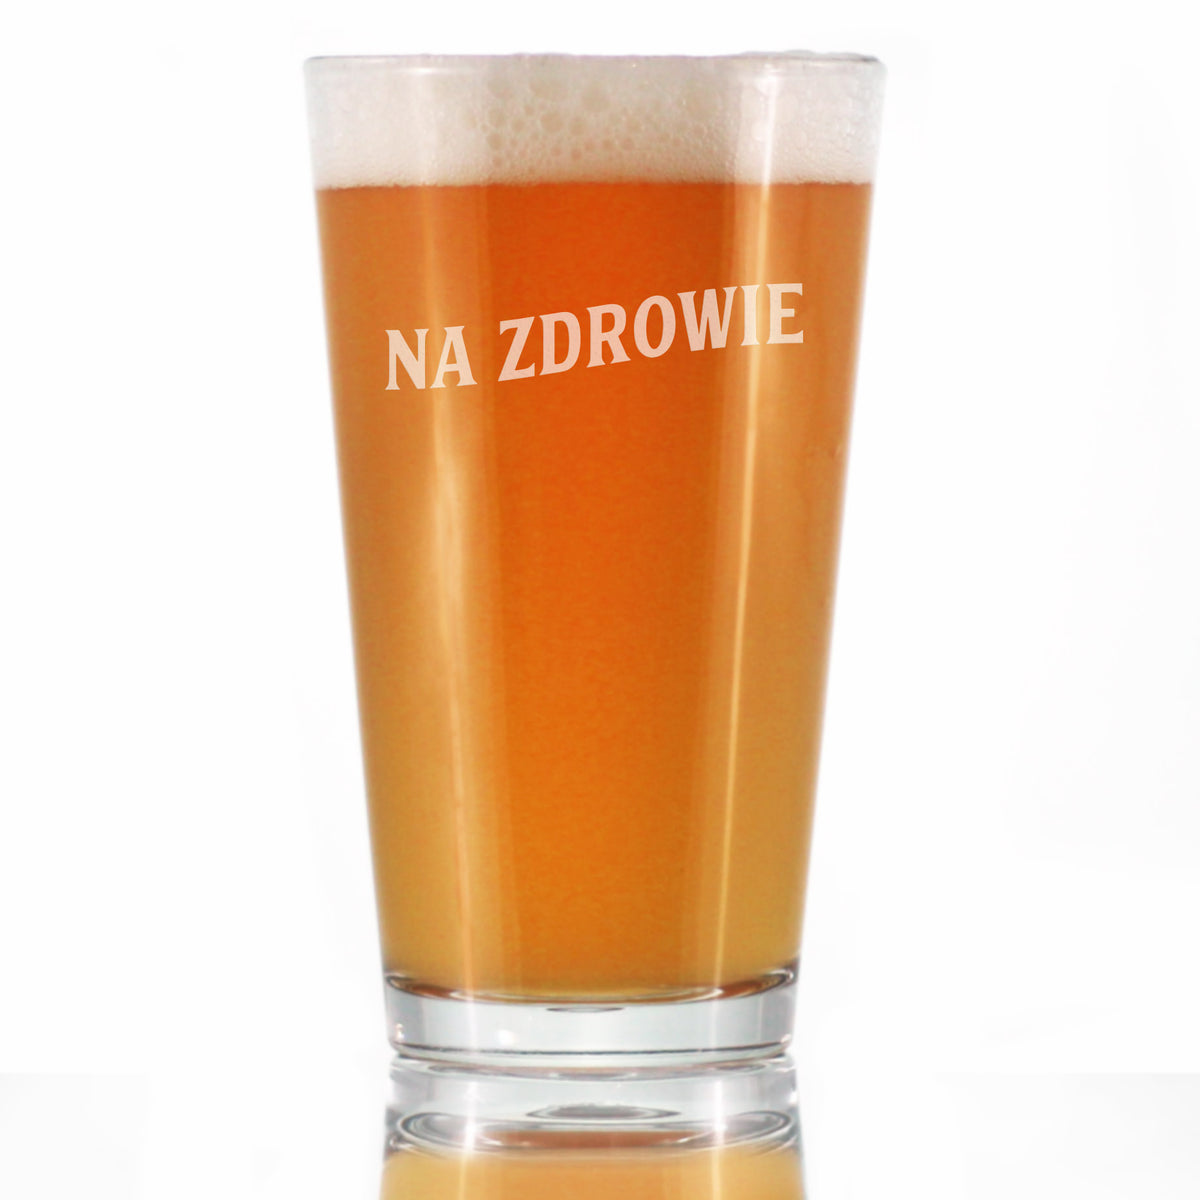 Na Zdrowie - Polish Cheers - Pint Glass for Beer - Cute Poland Themed Gifts or Party Decor for Women and Men - 16 Oz